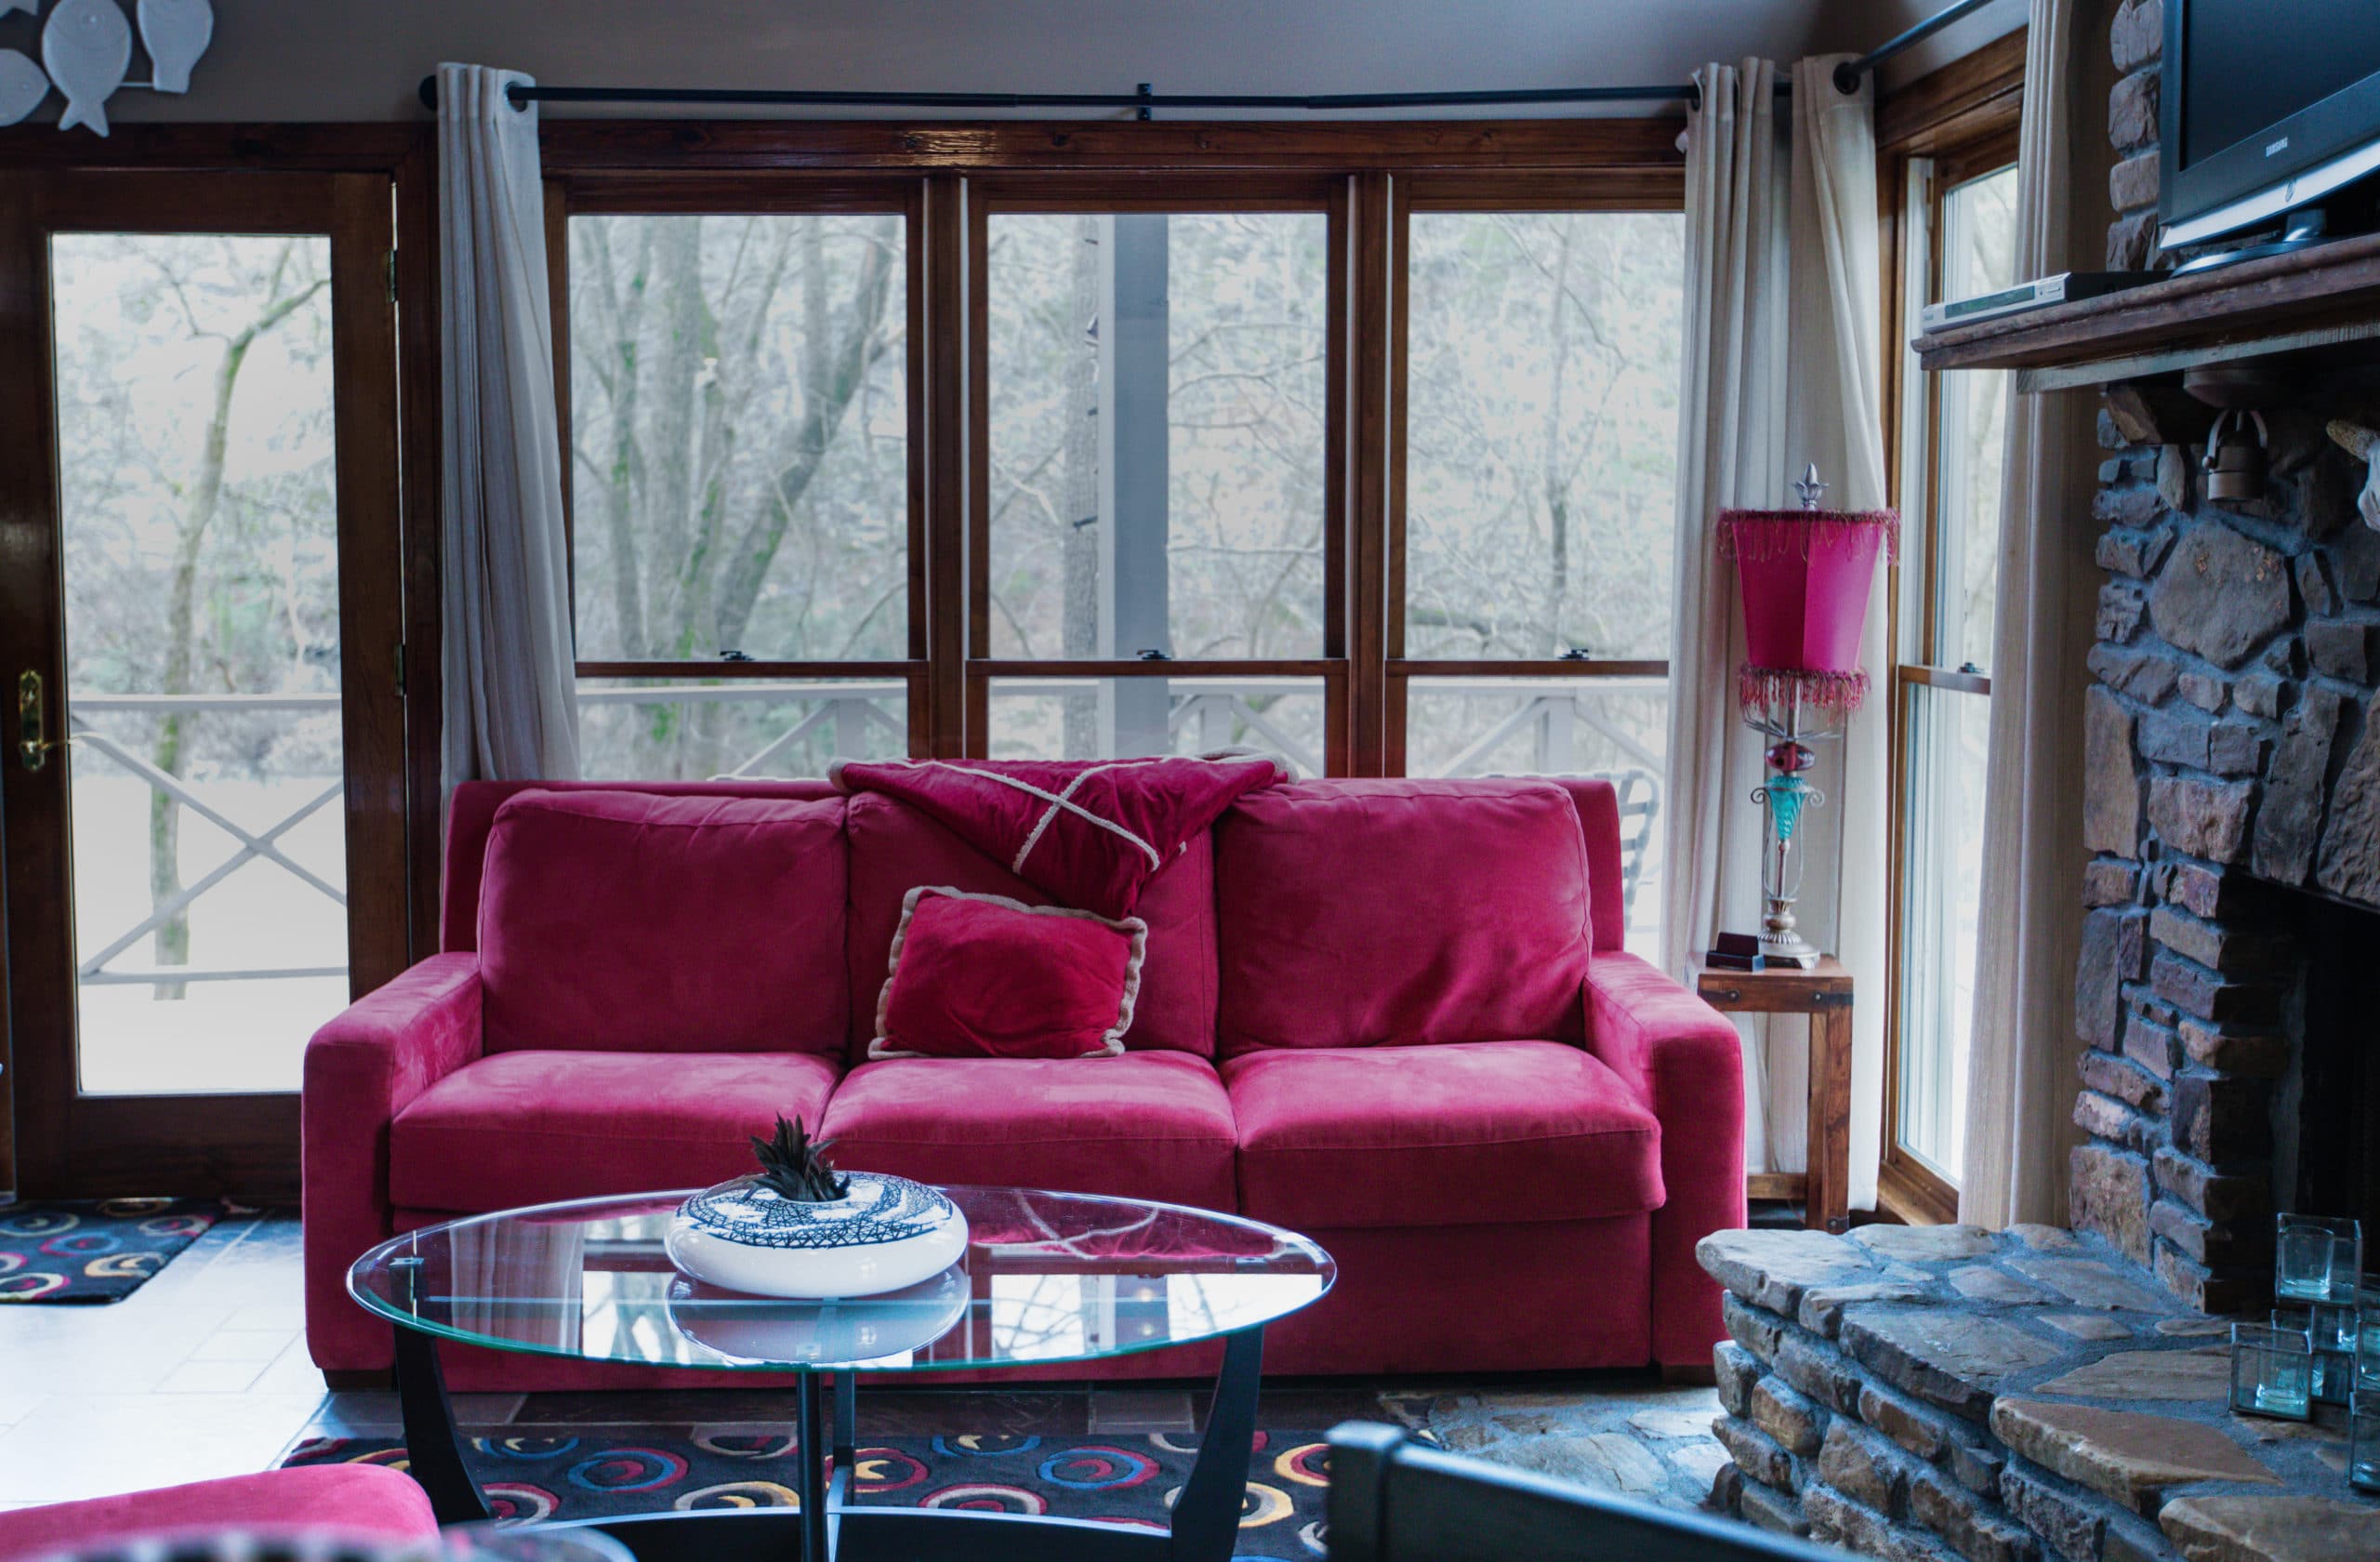 rivers-bend-cabin-04-riverside-retreat-living-room-red-couch-windows-scaled